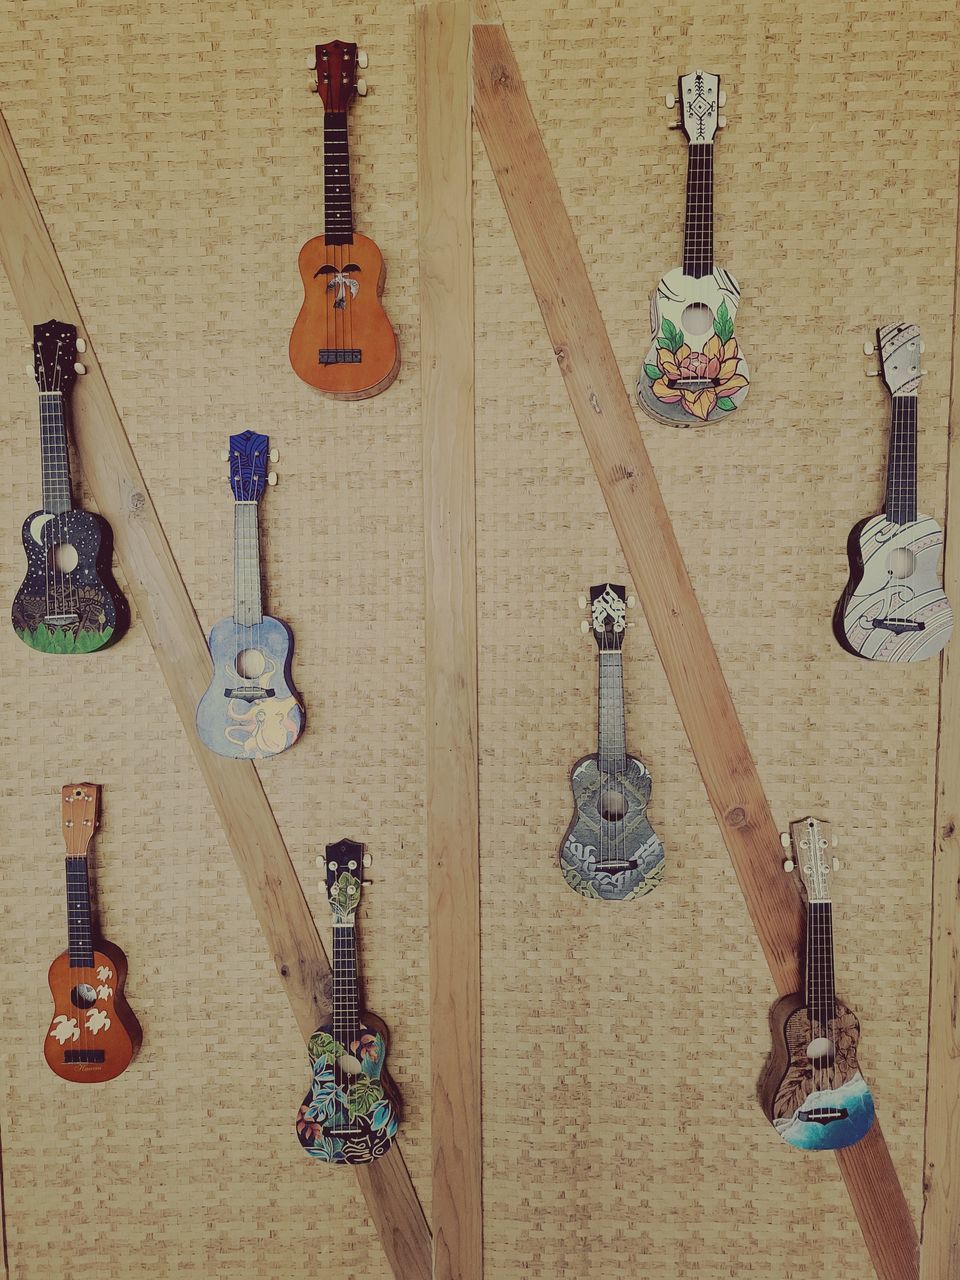 guitar, string instrument, wood, plucked string instruments, variation, indoors, no people, musical instrument, hanging, music, wall - building feature, arrangement, large group of objects, still life, musical equipment